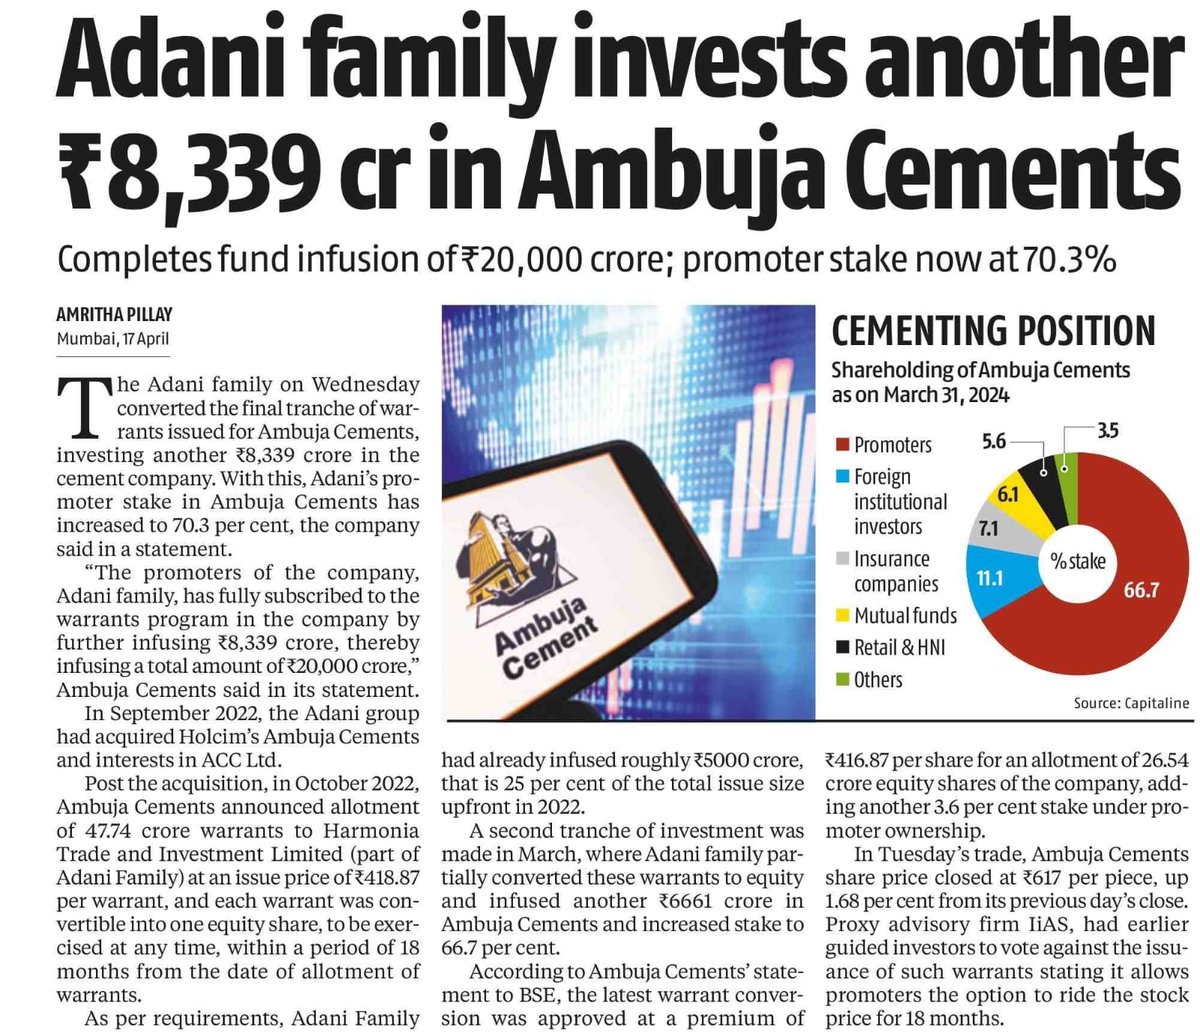 Adani Family completes Ambuja warrant subscription, infuses Rs 20,000 Cr. to increase stake to 70.3% #ThisIsAdaniCement #BuildingNationsWithGoodness #GrowthWithGoodness #GreenGrowth #ESG